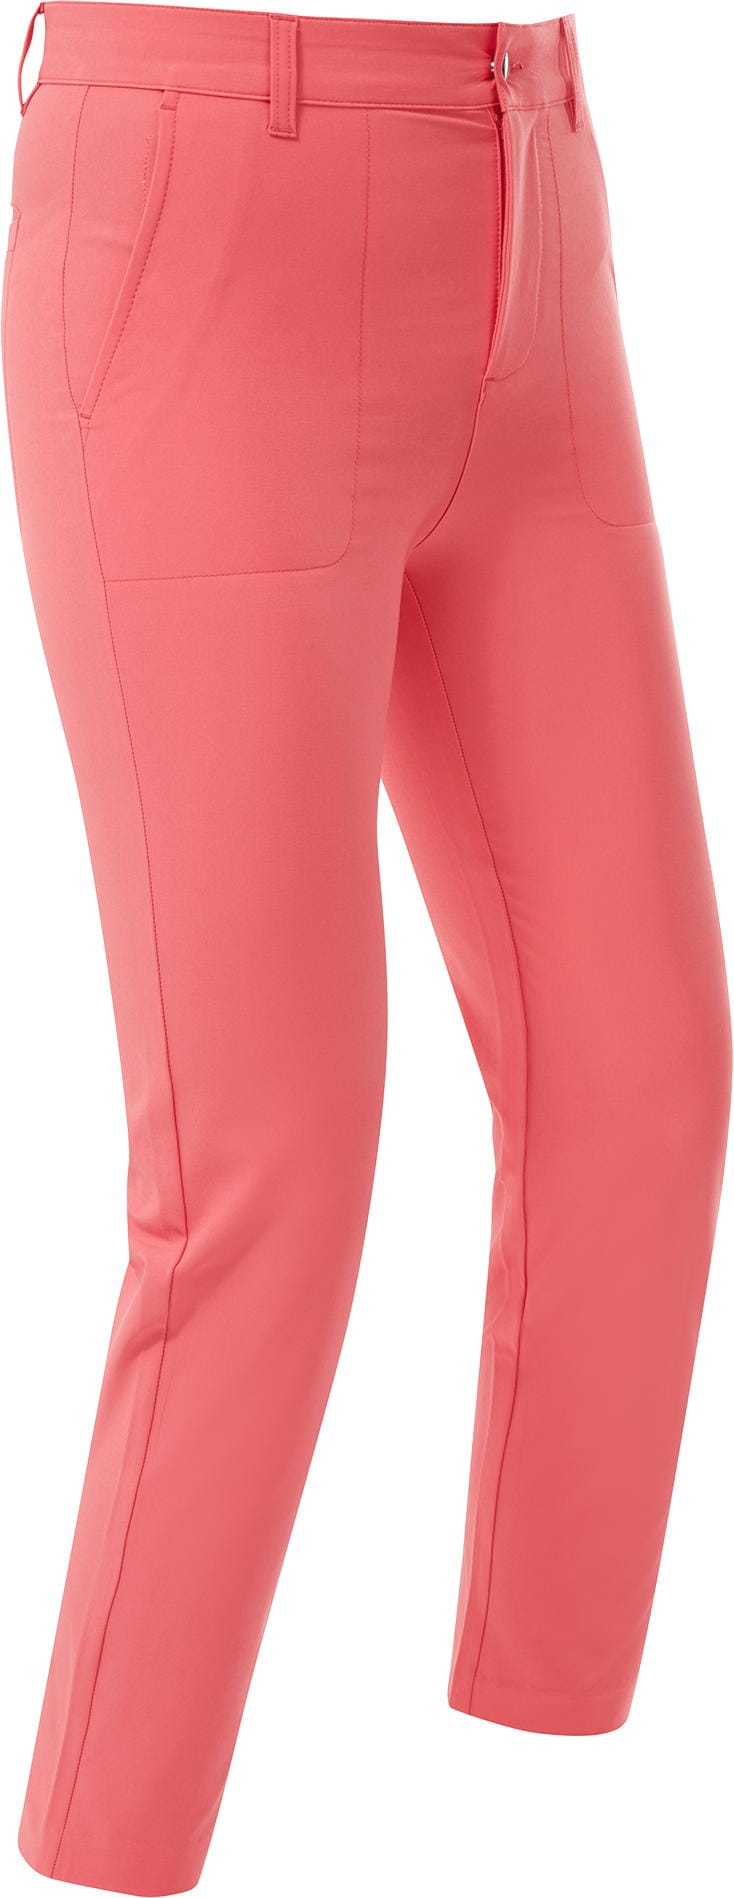 FootJoy Cropped 7/8 Hose, coral/white